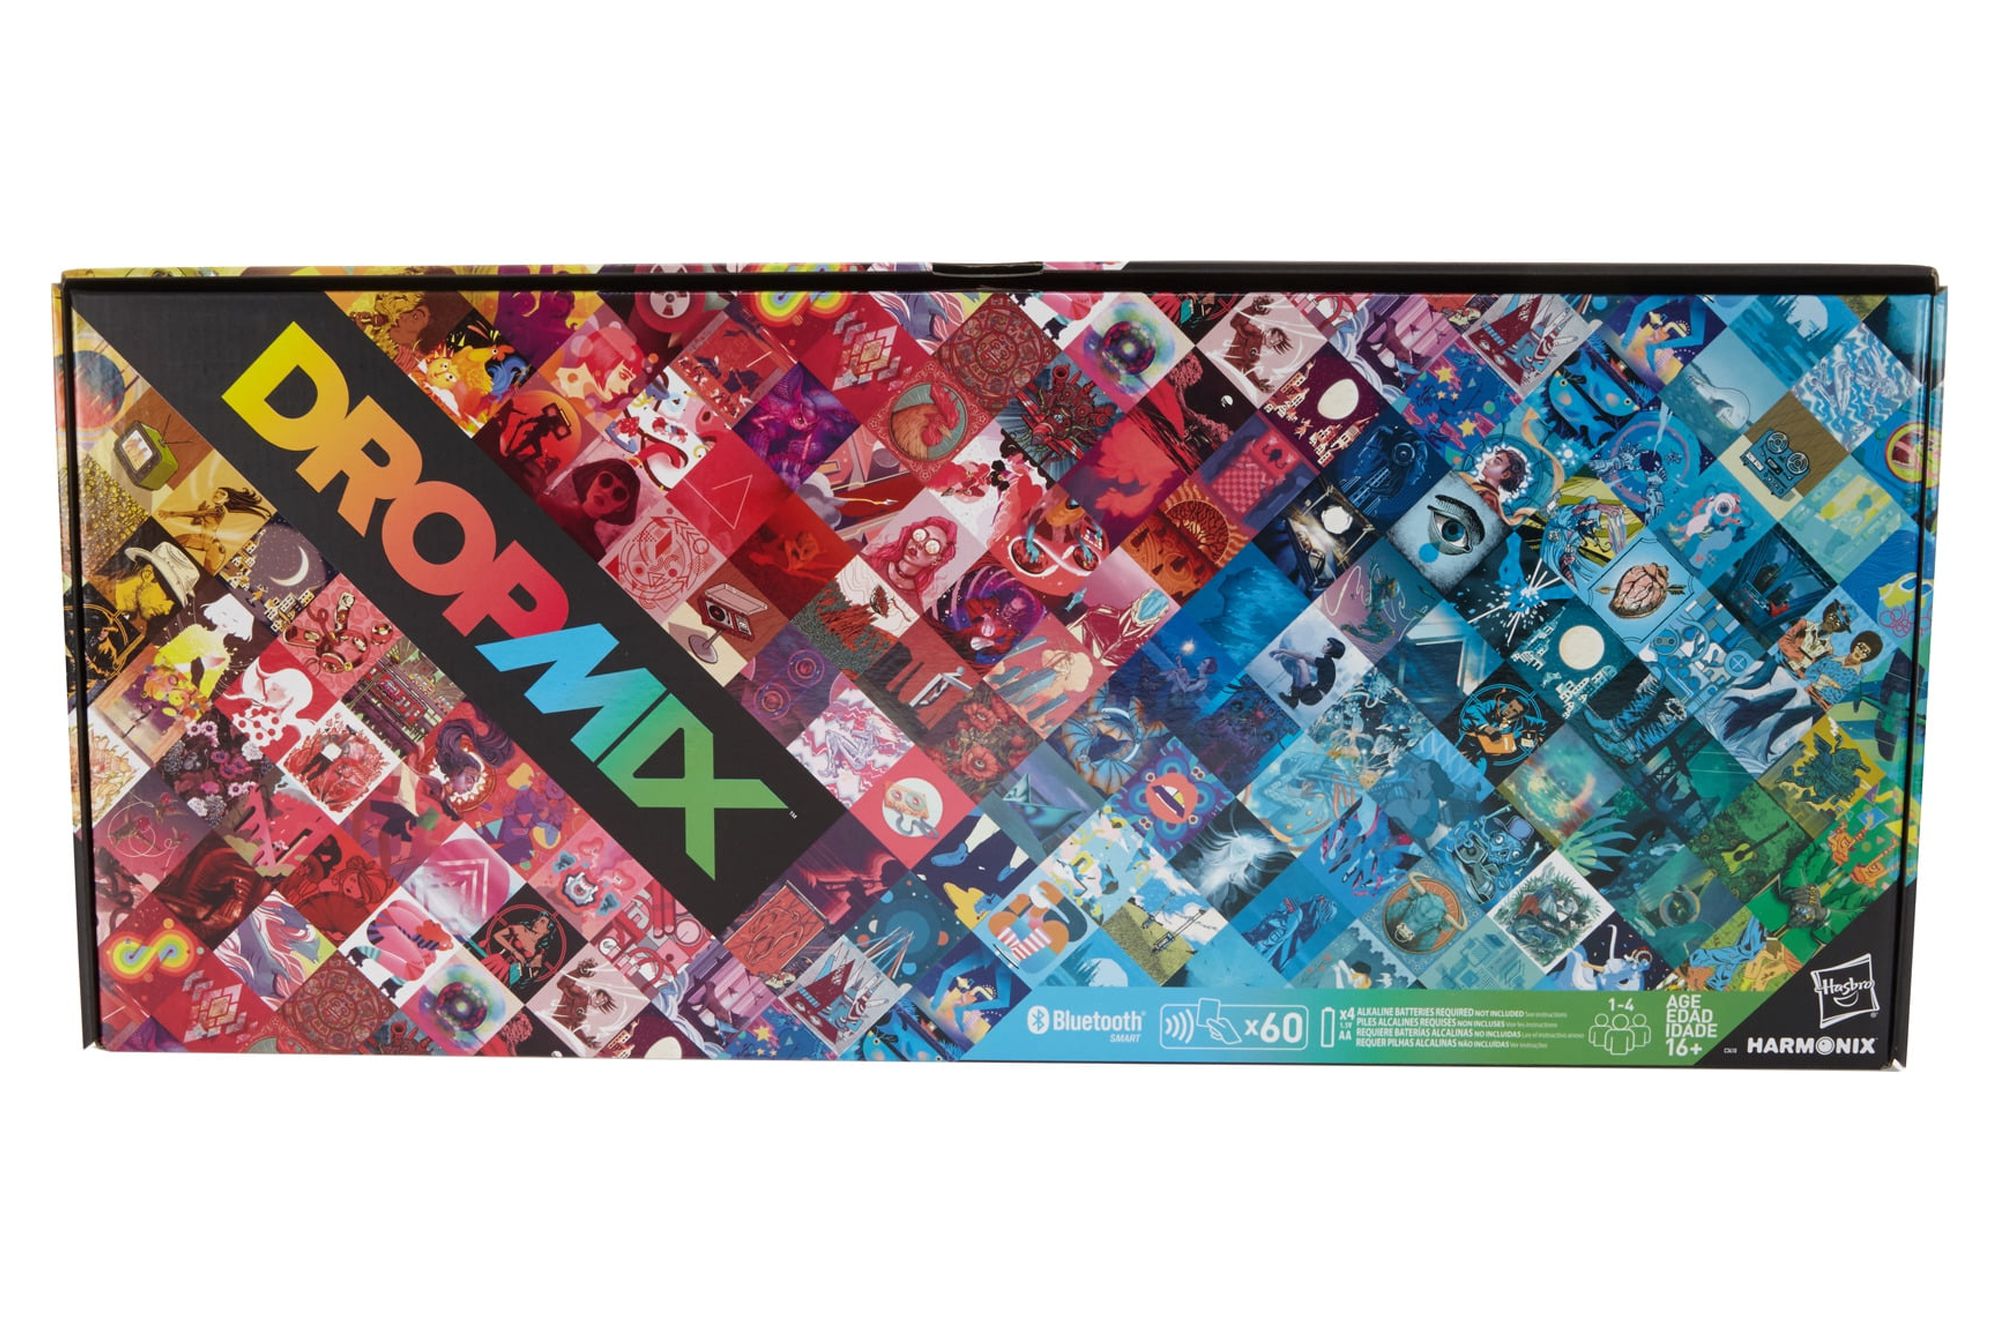 Dropmix Music Gaming System - image 1 of 15